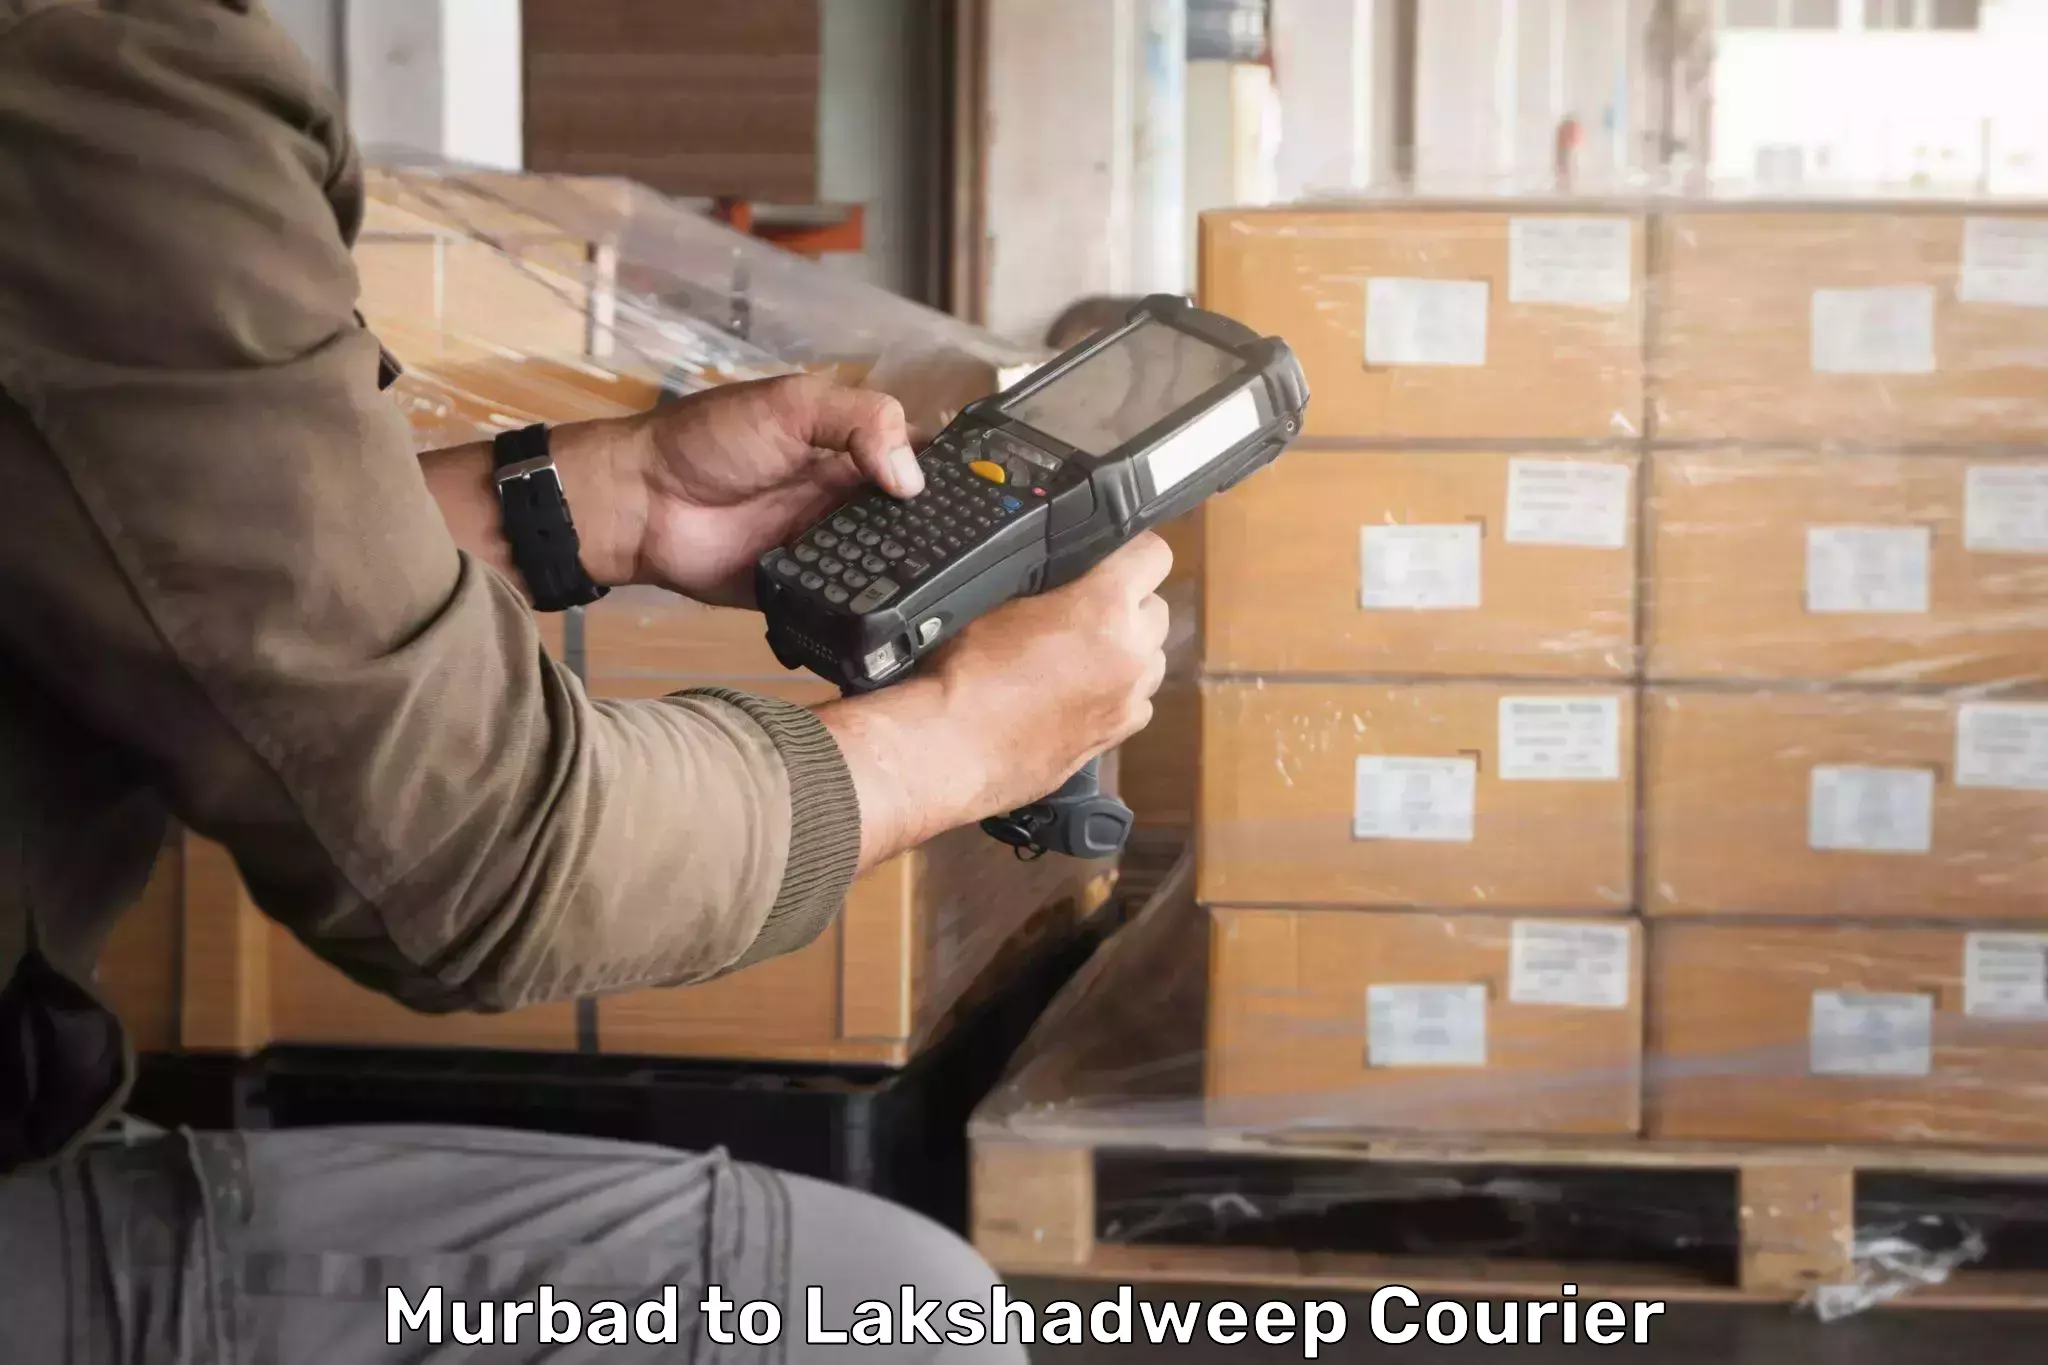 Global shipping solutions Murbad to Lakshadweep